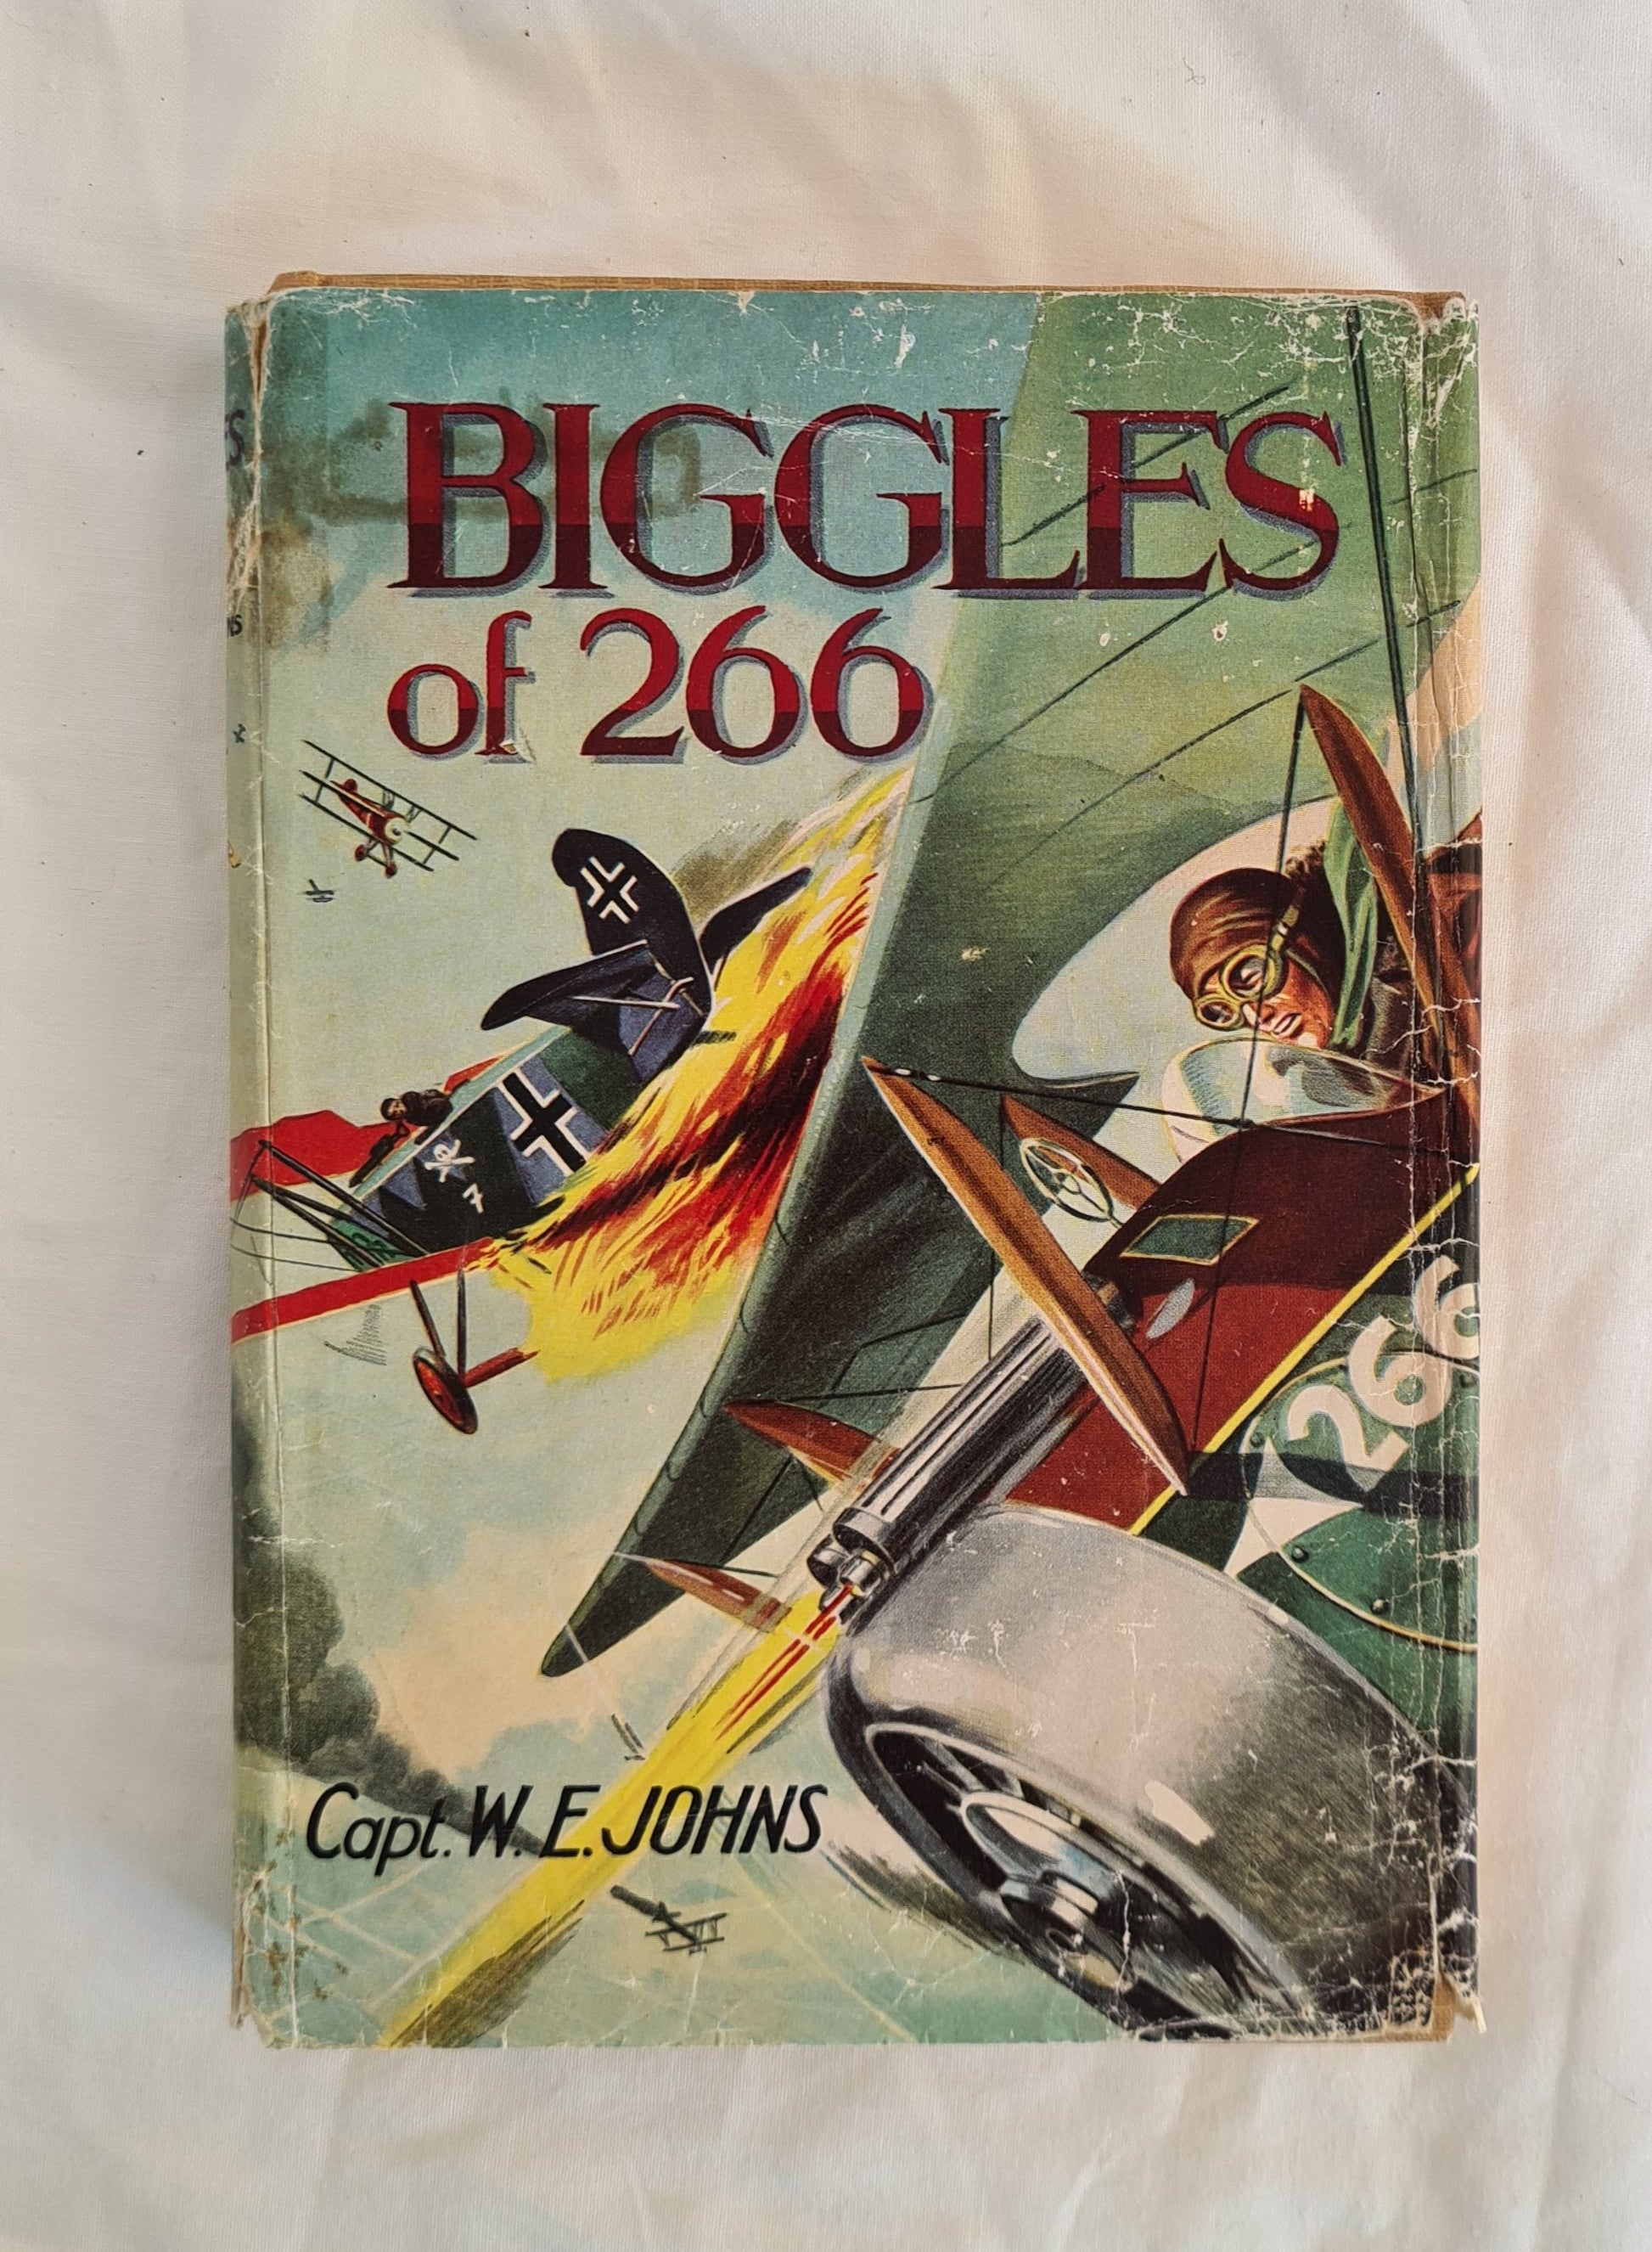 Biggles of 266 by Capt. W. E. Johns